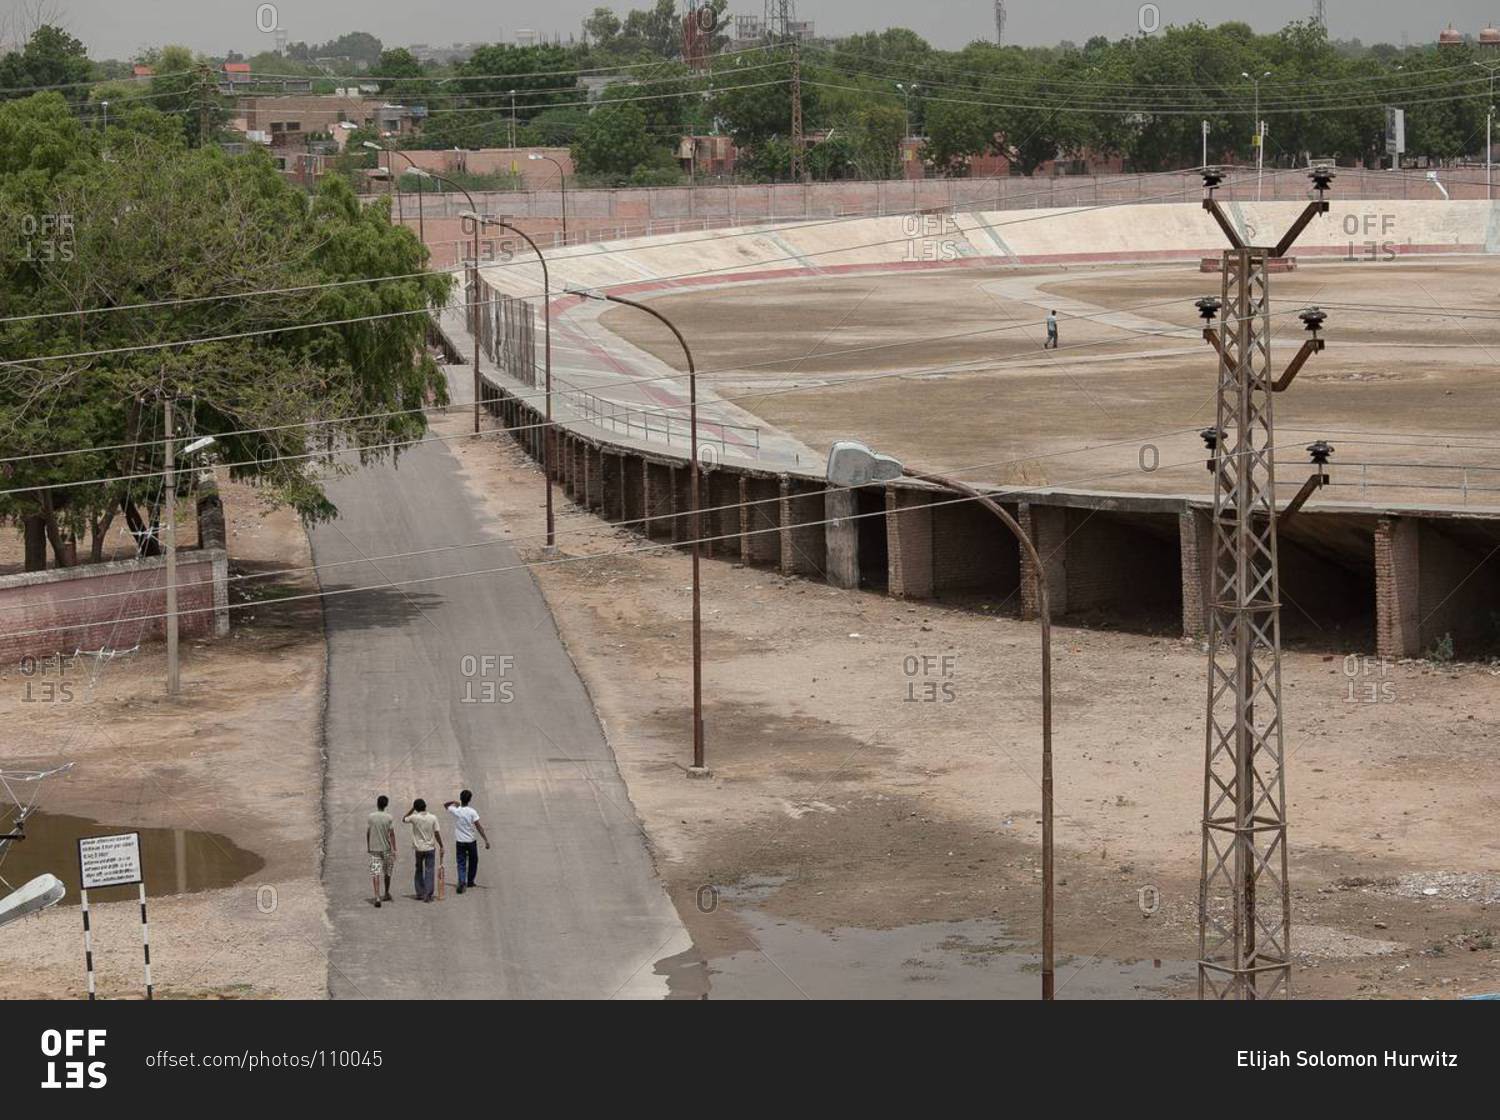 Young men walk to an empty stadium to play cricket in Bikaner, India